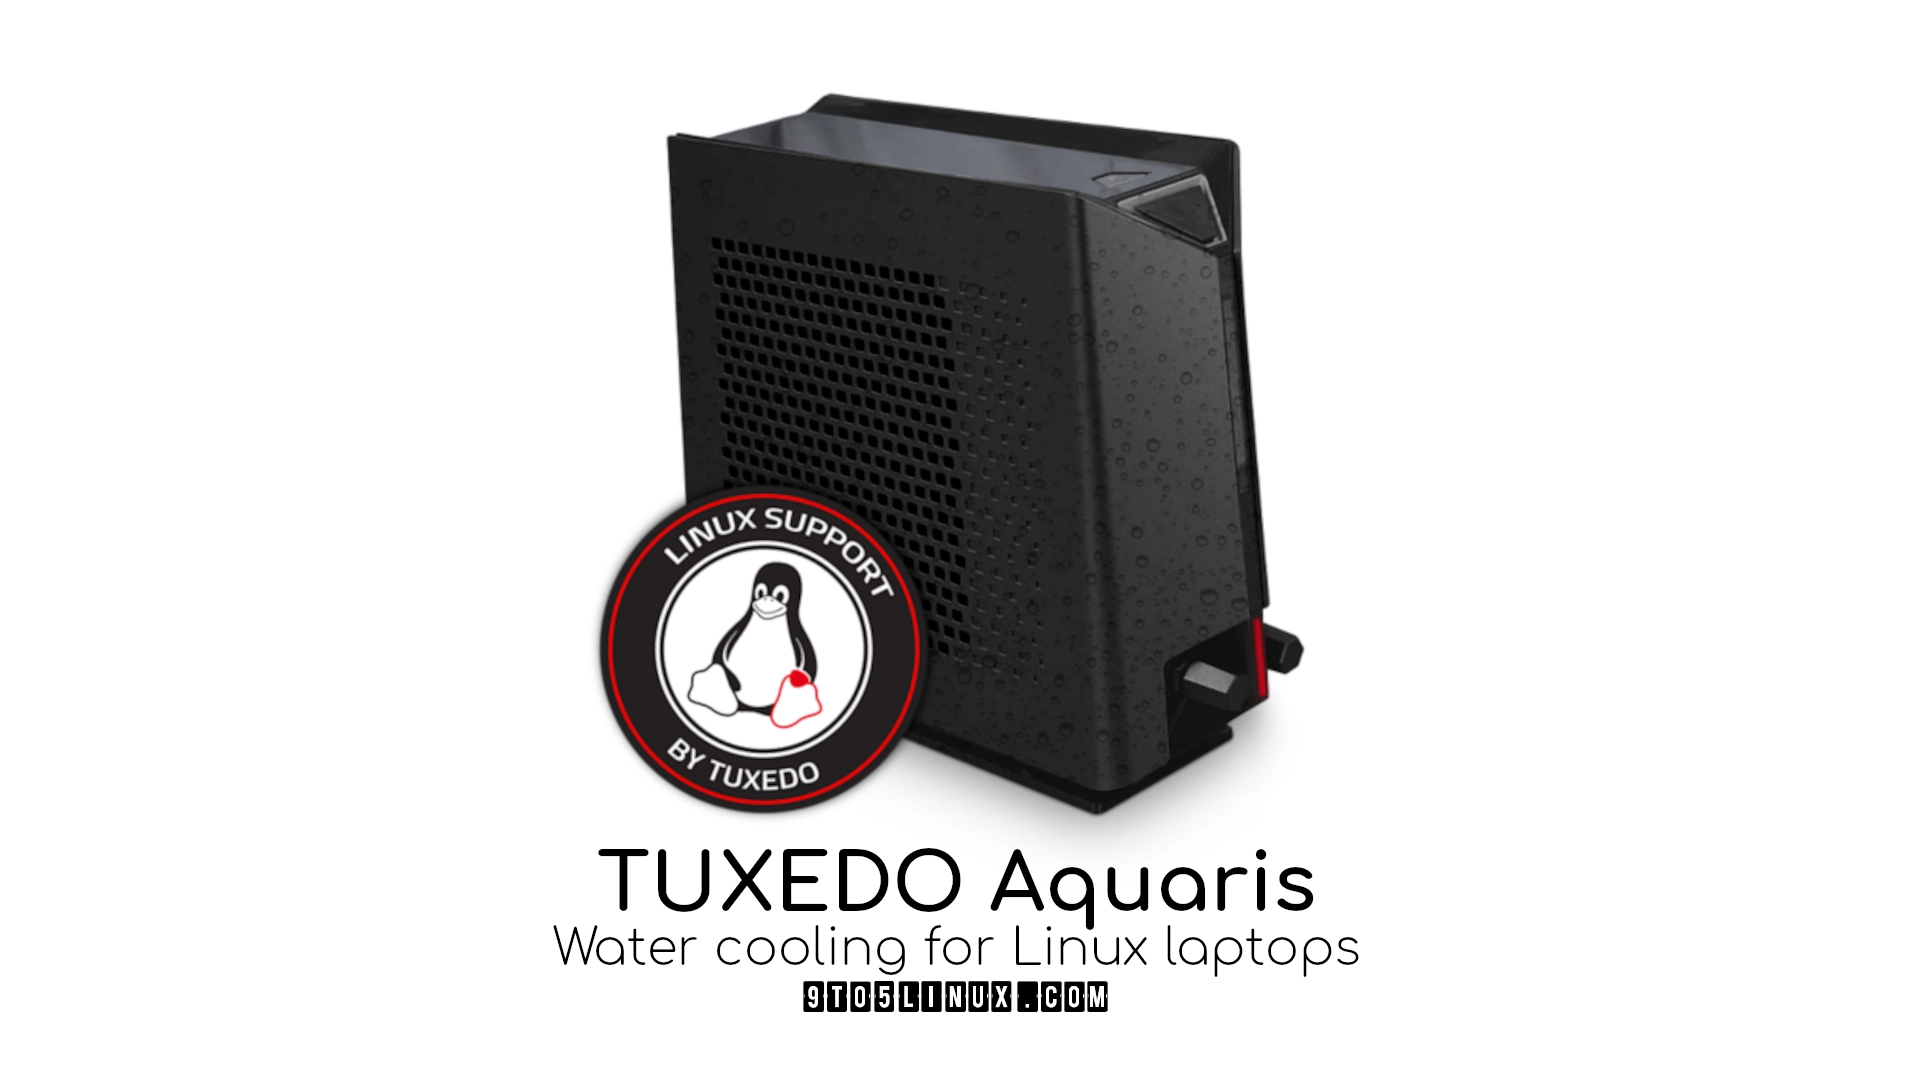 TUXEDO Aquaris Announced as First Water Cooling System for Linux Laptops